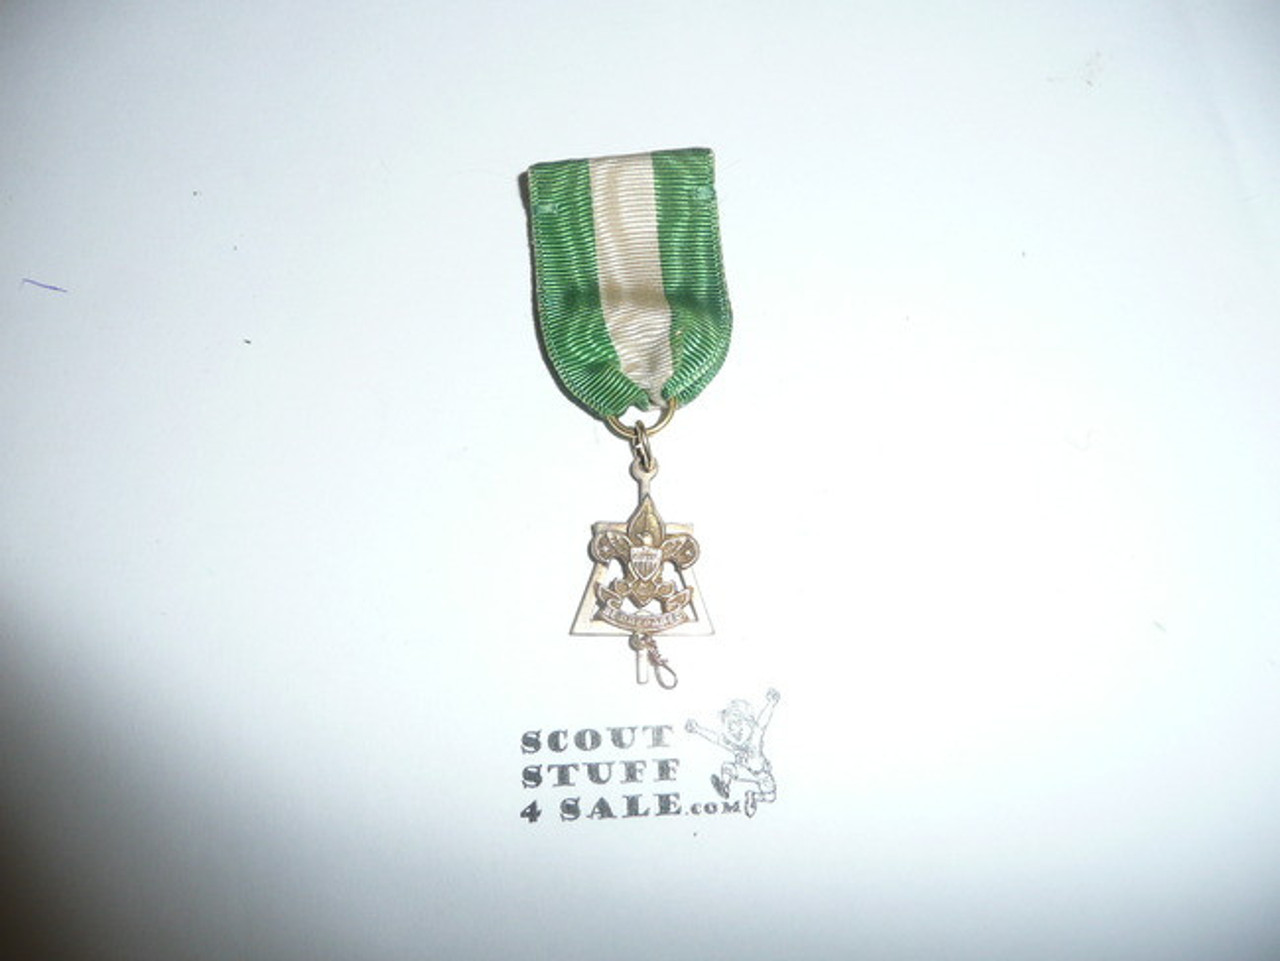 Scouter's Key Award Medal Pendant / Charm (First Class Design), 1920's, 10k Gold